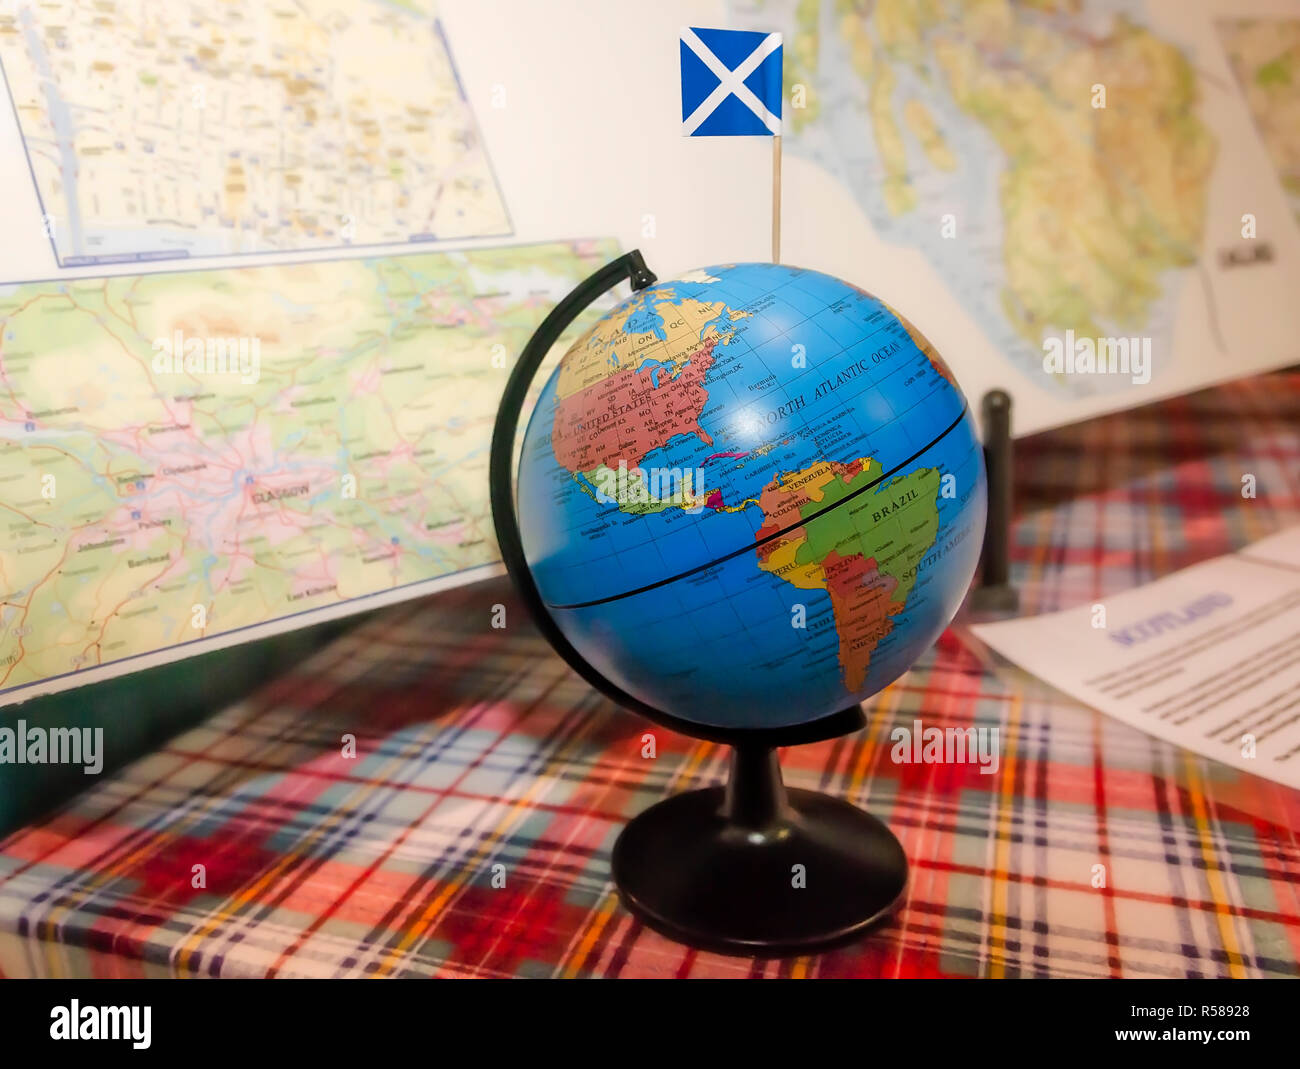 The Scotland flag is inserted in a globe and displayed with maps at the 34th annual Mobile International Festival, Nov. 17, 2018, in Mobile, Alabama. Stock Photo